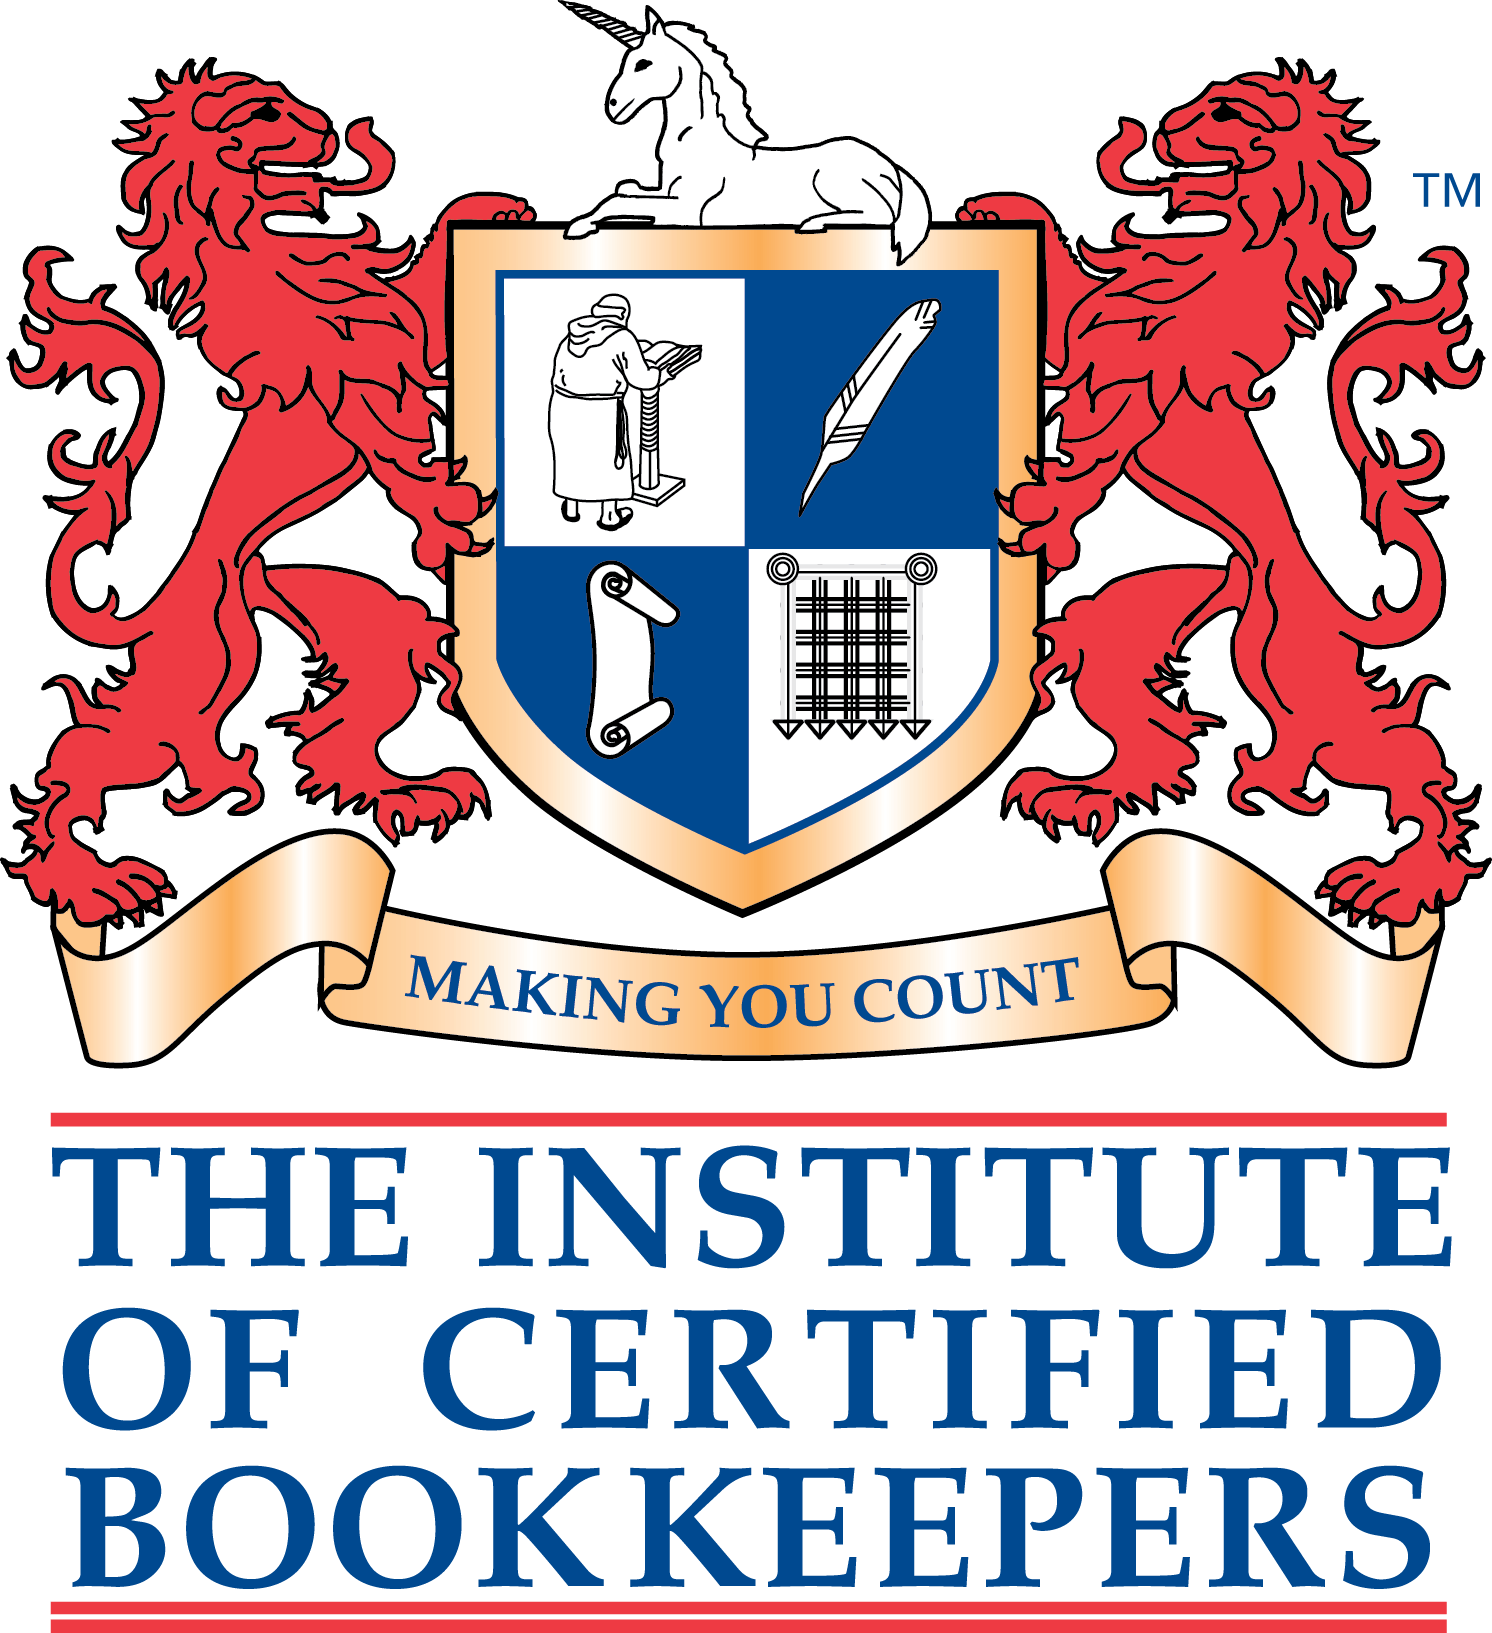 Institute_of_Certified_Bookkeepers_crest